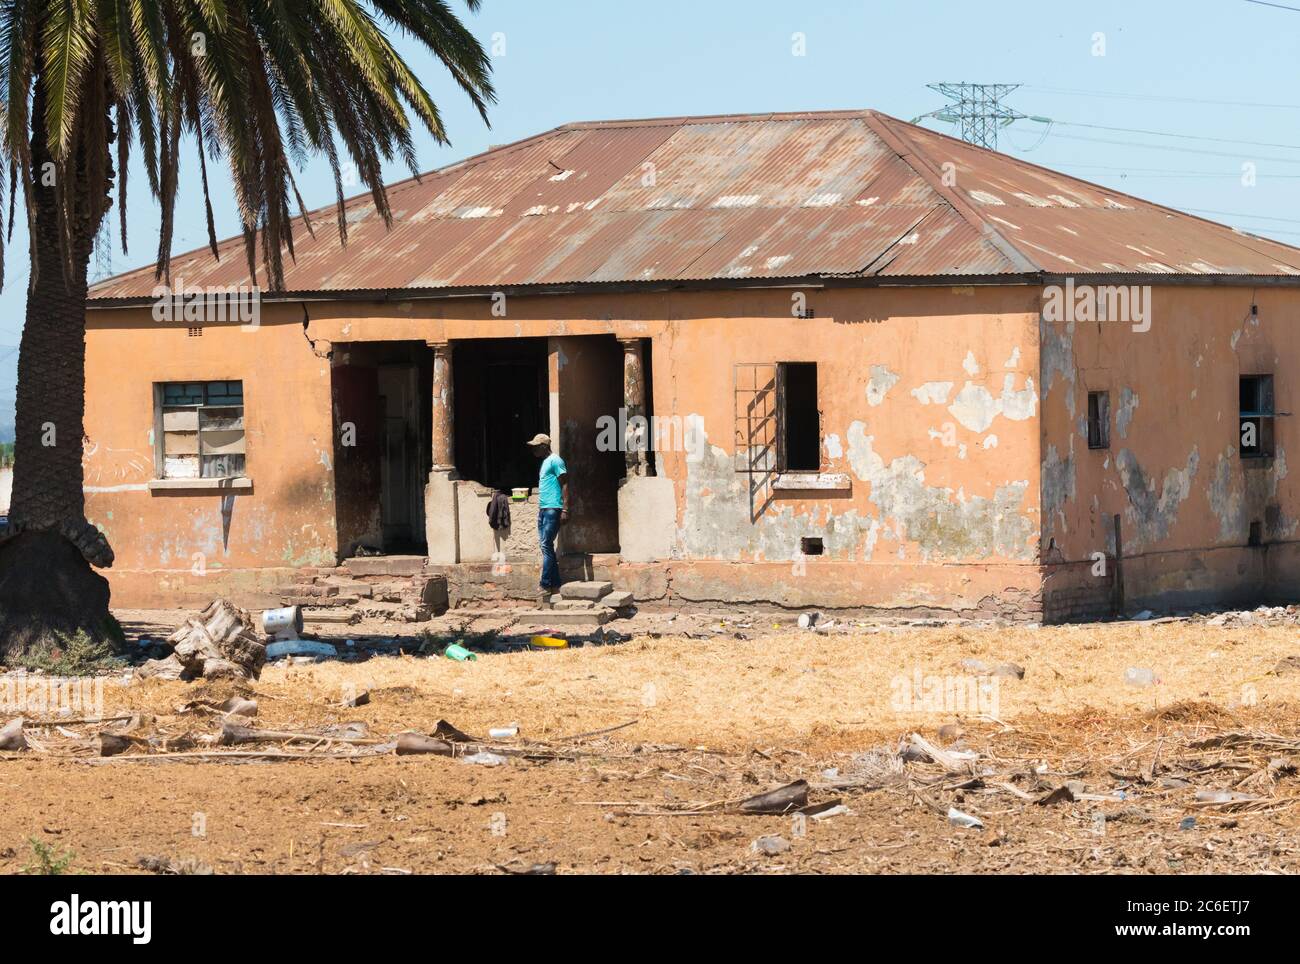 old, decrepit, neglected house with an African man standing outside showing poverty and poor living conditions in urban Cape Town, South Africa Stock Photo